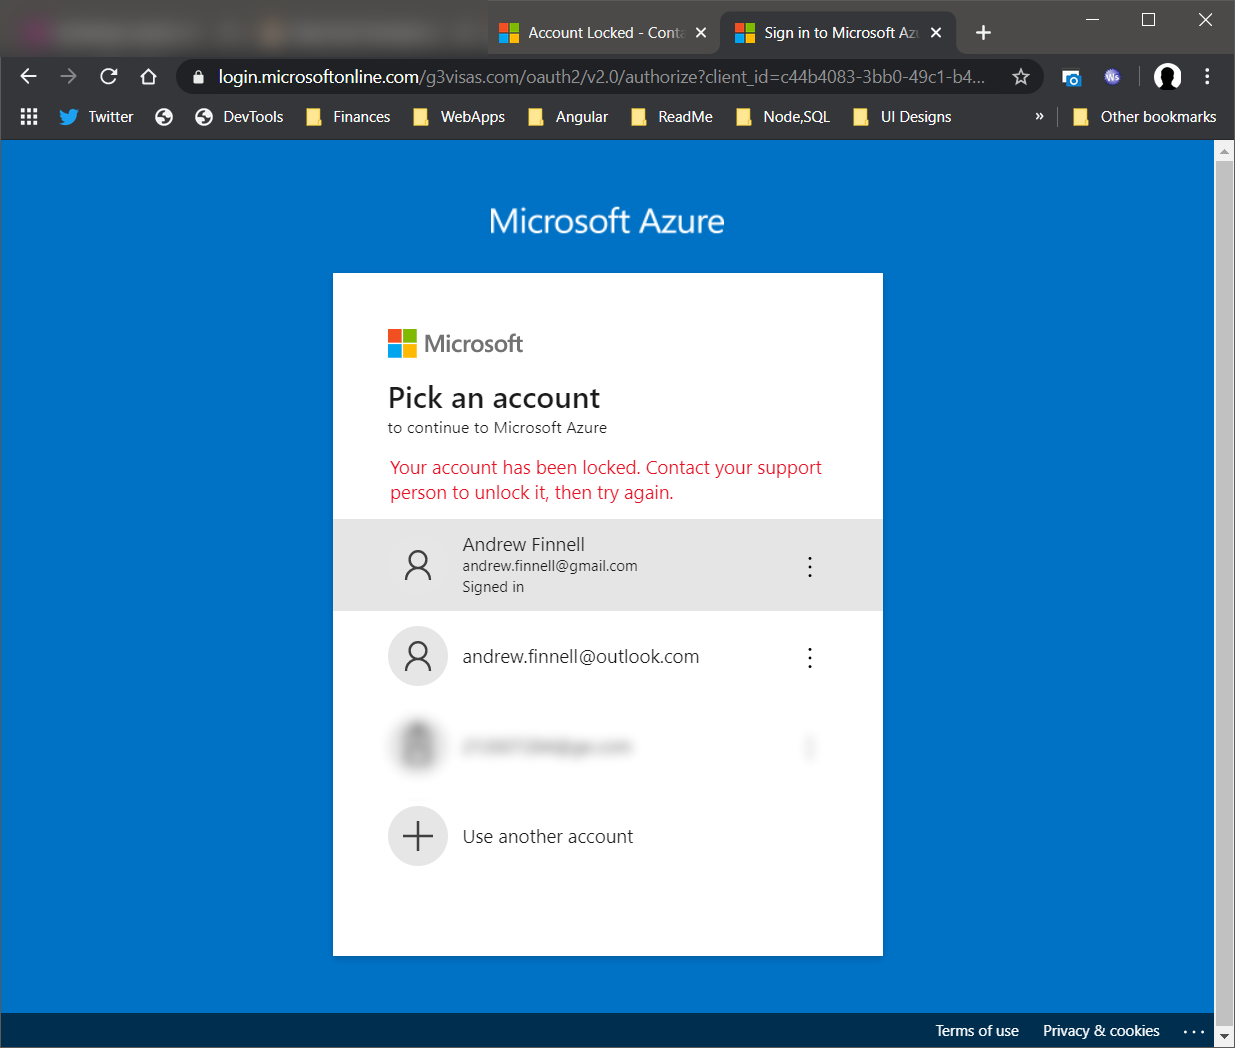 9953-azure-account-locked-2020.png